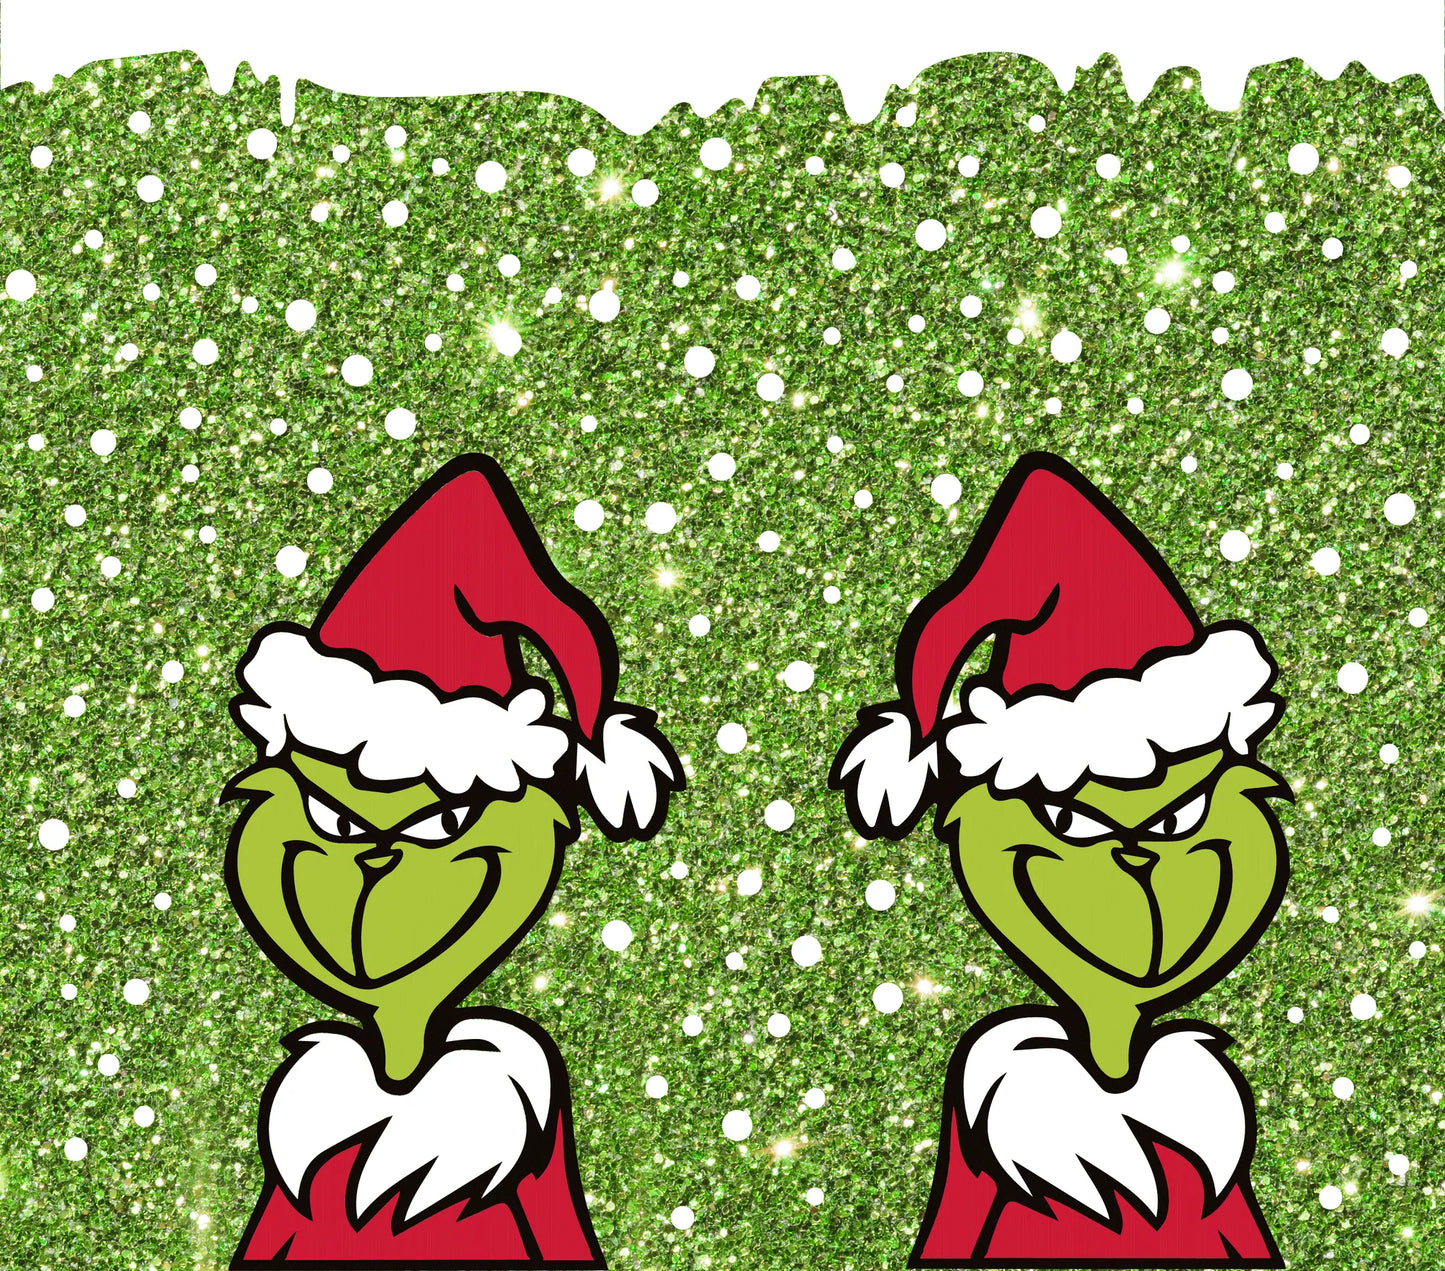 Evil Christmas Green Man Twins Smiling - Cartoon - Assorted Colors with Sparkly Green & White Background - 20 Oz Sublimation Transfer